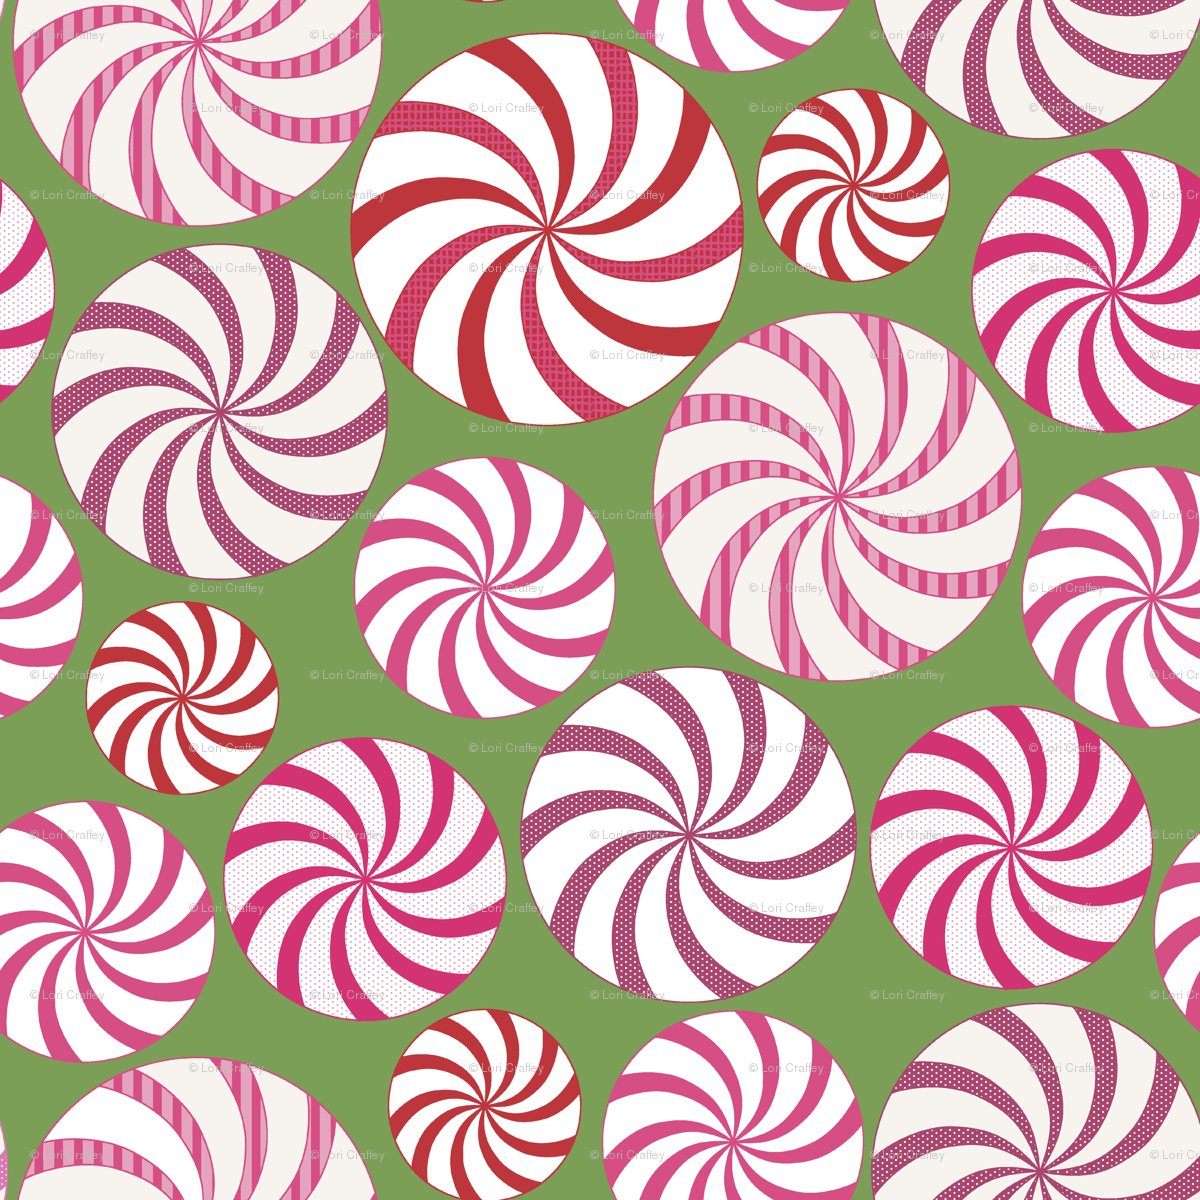 Candy Cane Wallpapers - Top Free Candy